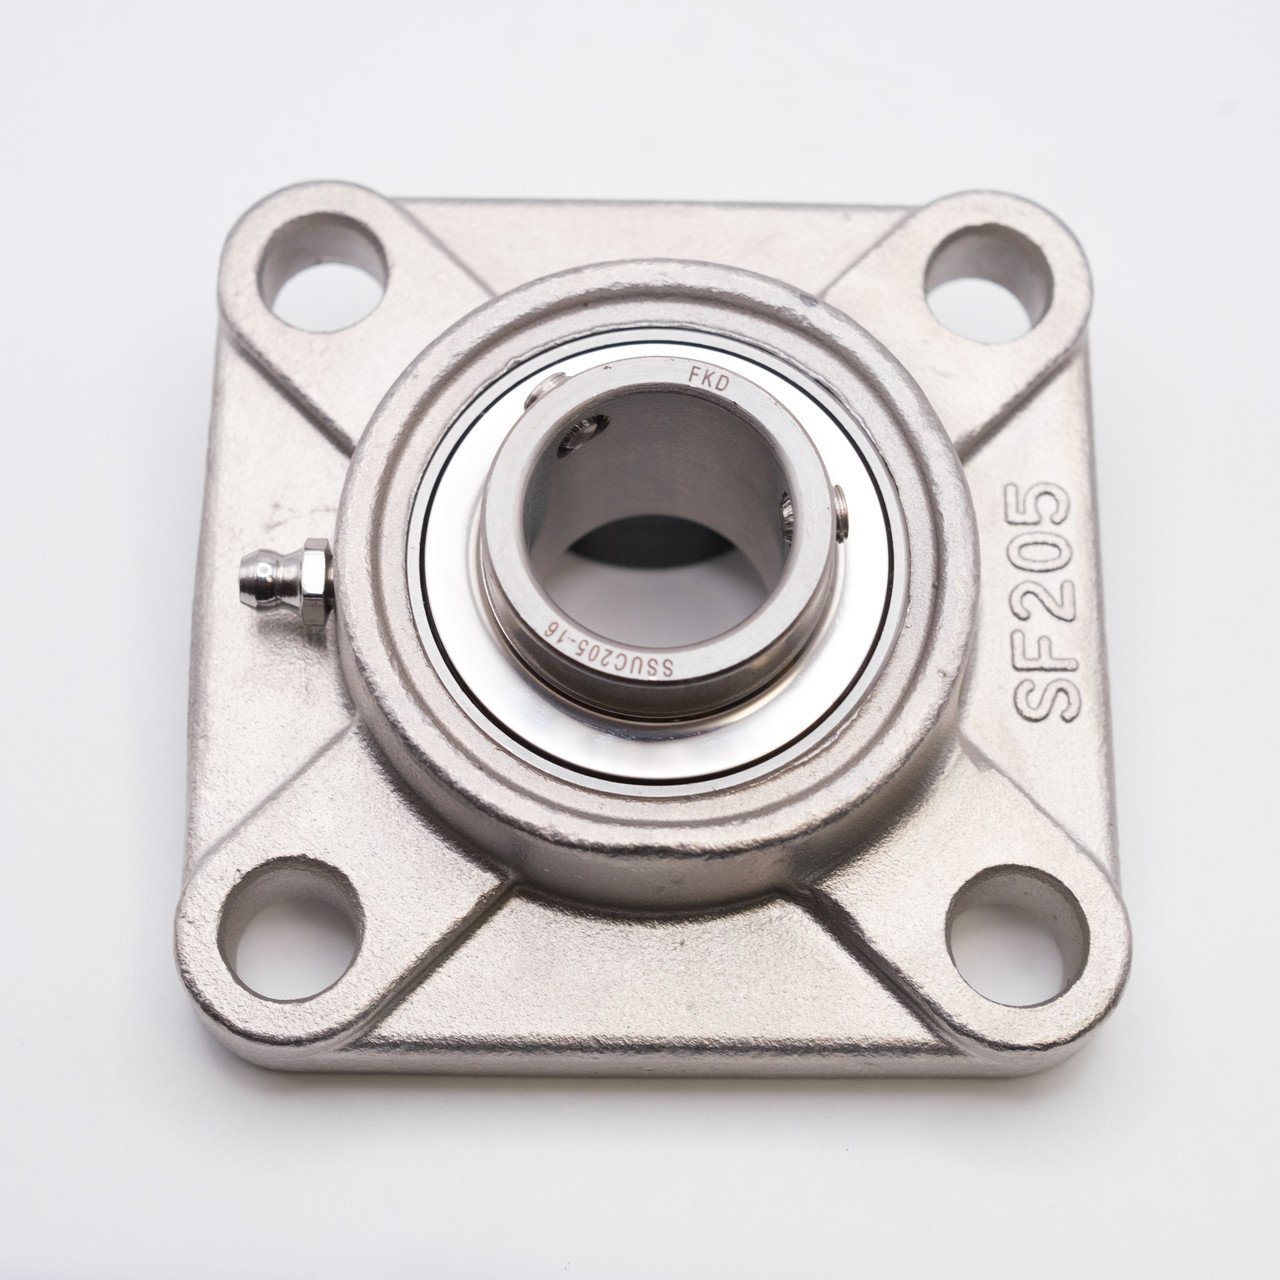 SUCSF209-27 Stainless Steel 4 Bolt Flange Shaft Size 1-11/16 INCH Top View